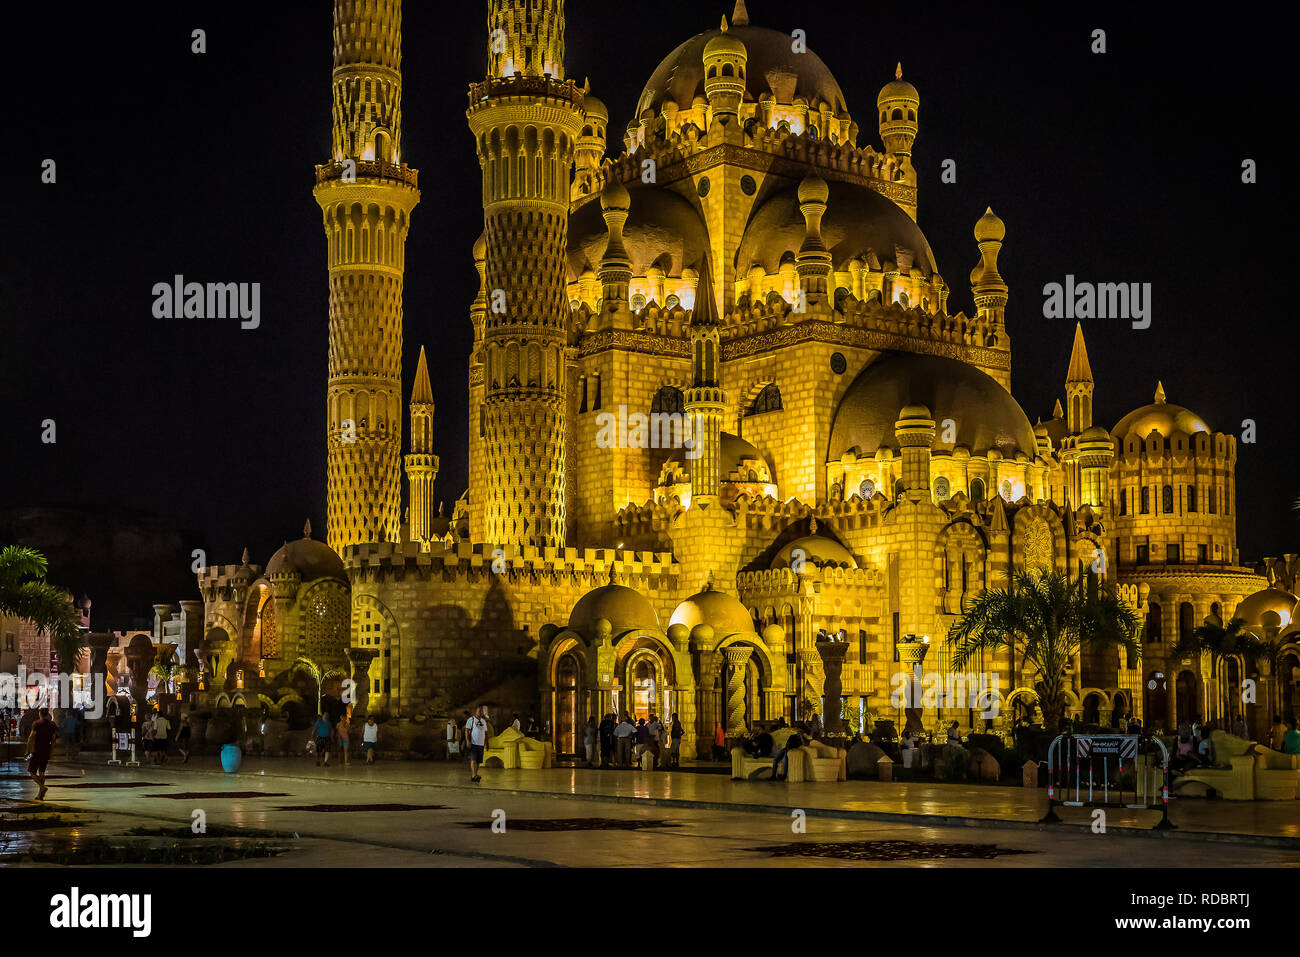 People walk in front of the Al Sahaba Mosque at night, Sharm El Sheikh, Egypt, october 30, 2018 Stock Photo